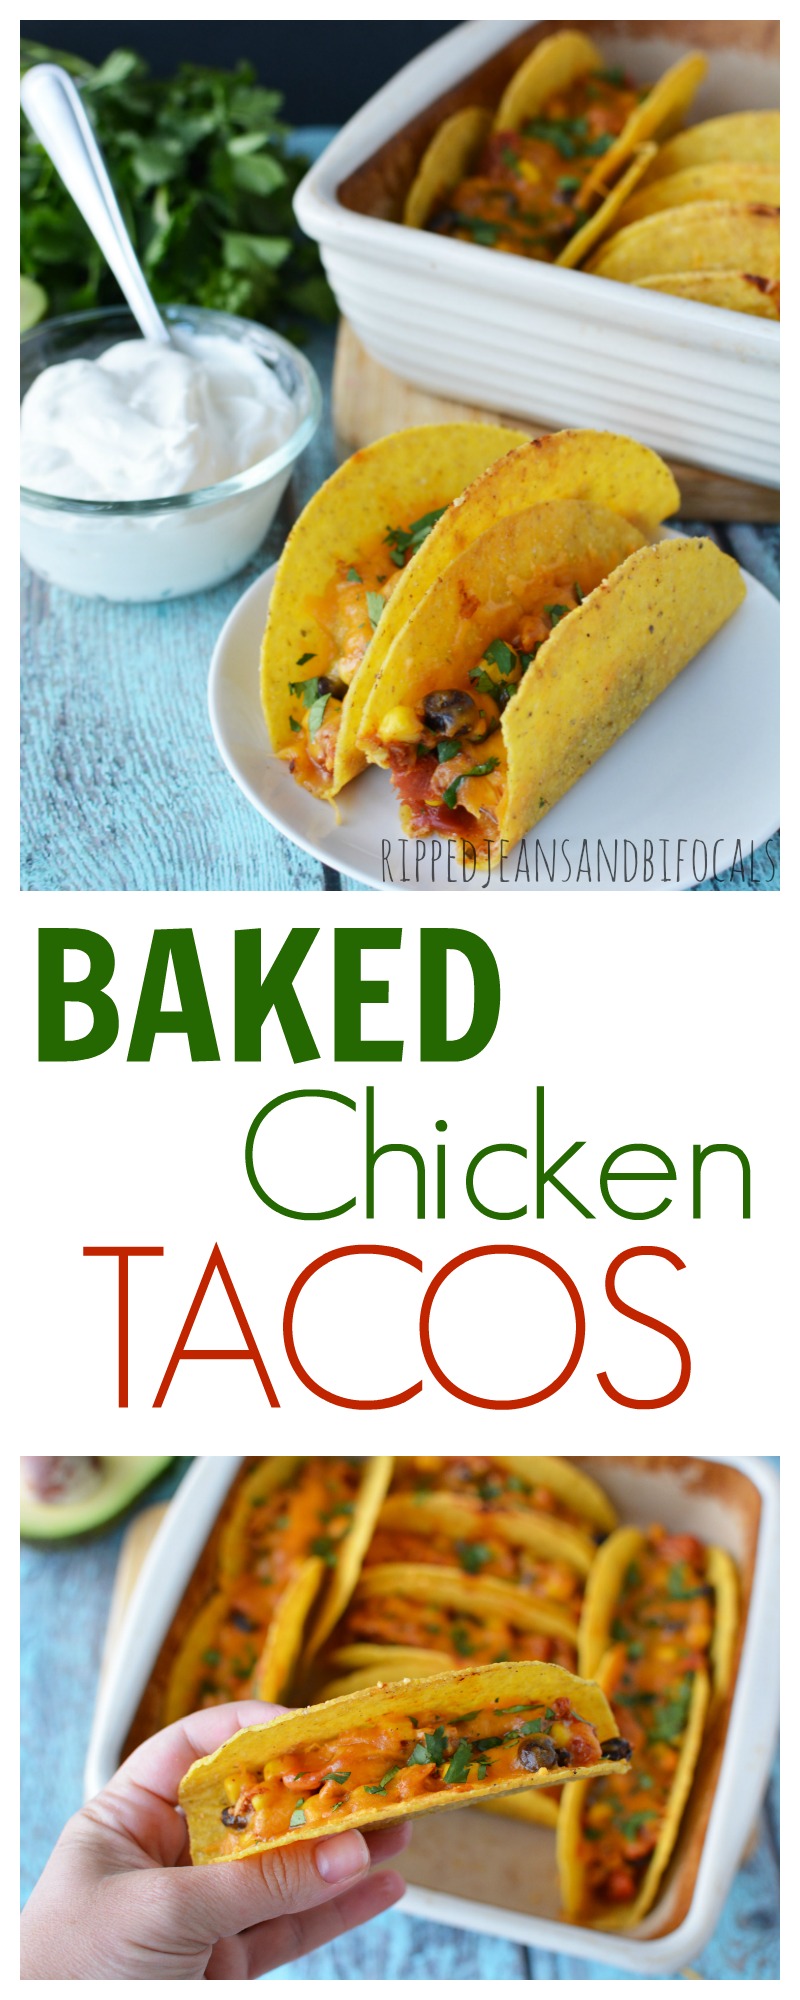 Baked chicken tacos - Ripped Jeans & Bifocals